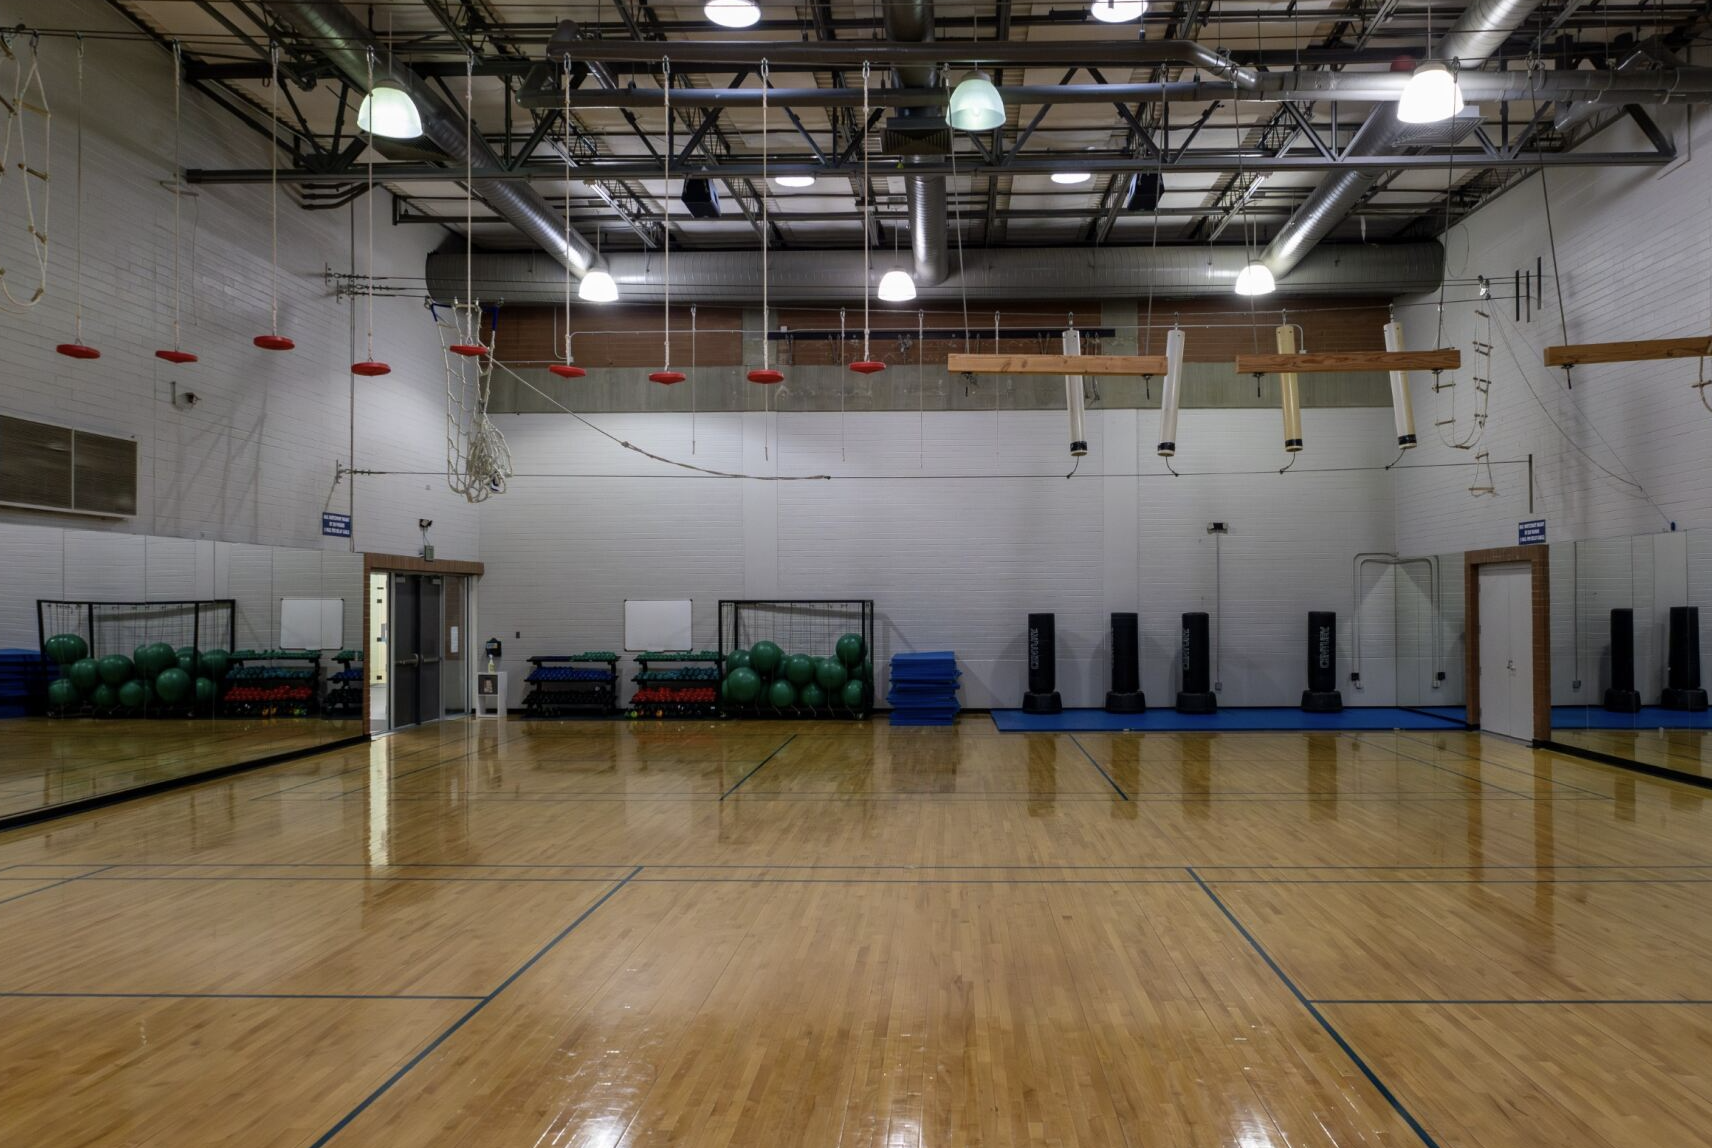 The inside of the gym with obstacle course hanging from the ceiling.